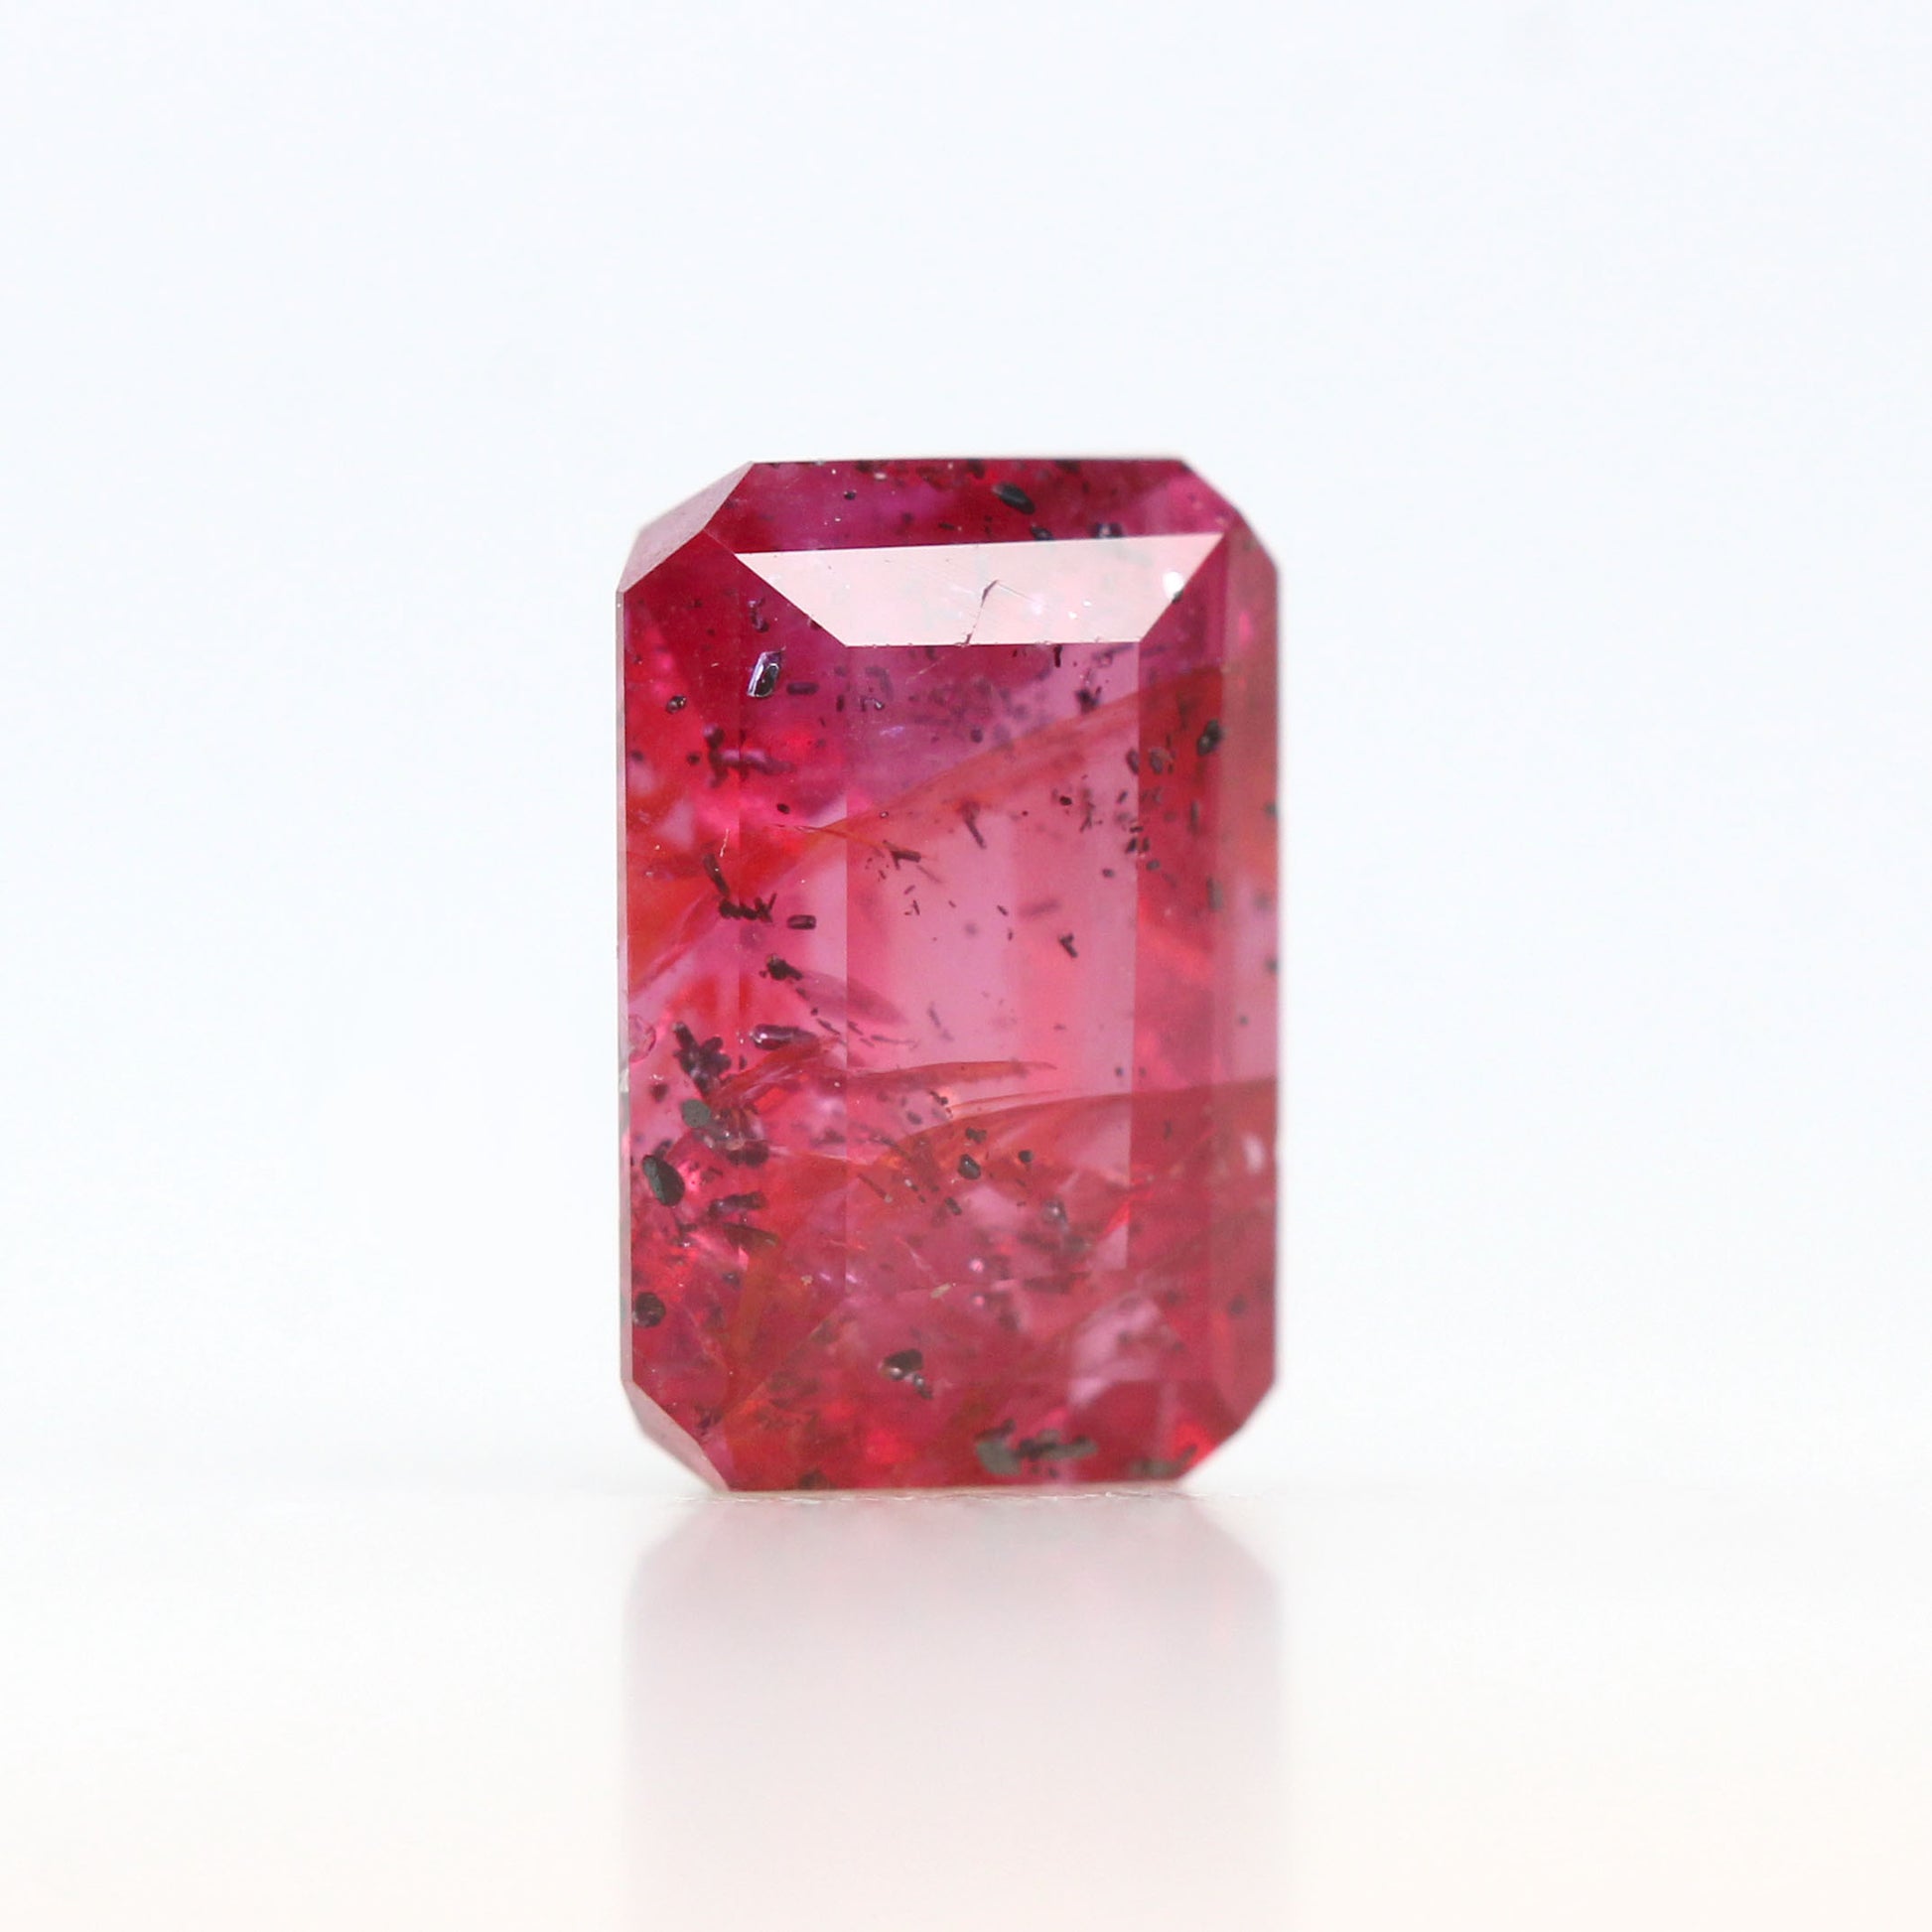 1.37 Carat Emerald Cut Pinkish Red Madagascar Ruby for Custom Work - Inventory Code RES137 - Midwinter Co. Alternative Bridal Rings and Modern Fine Jewelry